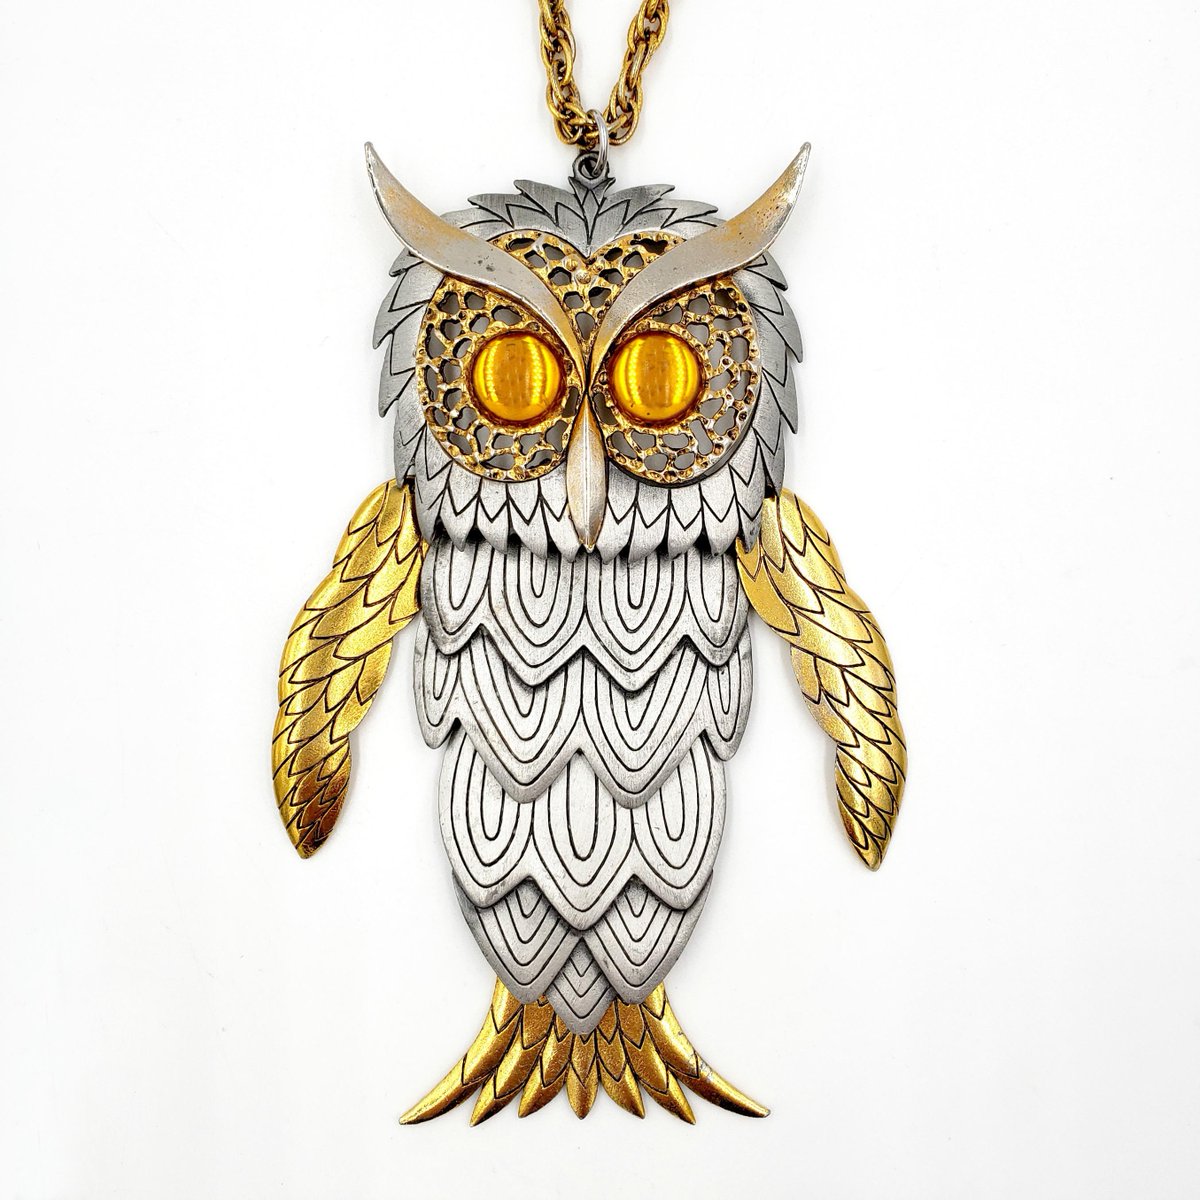 Vintage Owl Articulated Necklace &amp;amp; Published Book Piece (Unmarked) [by bitchinretro]
  
 #vintage #teamlove